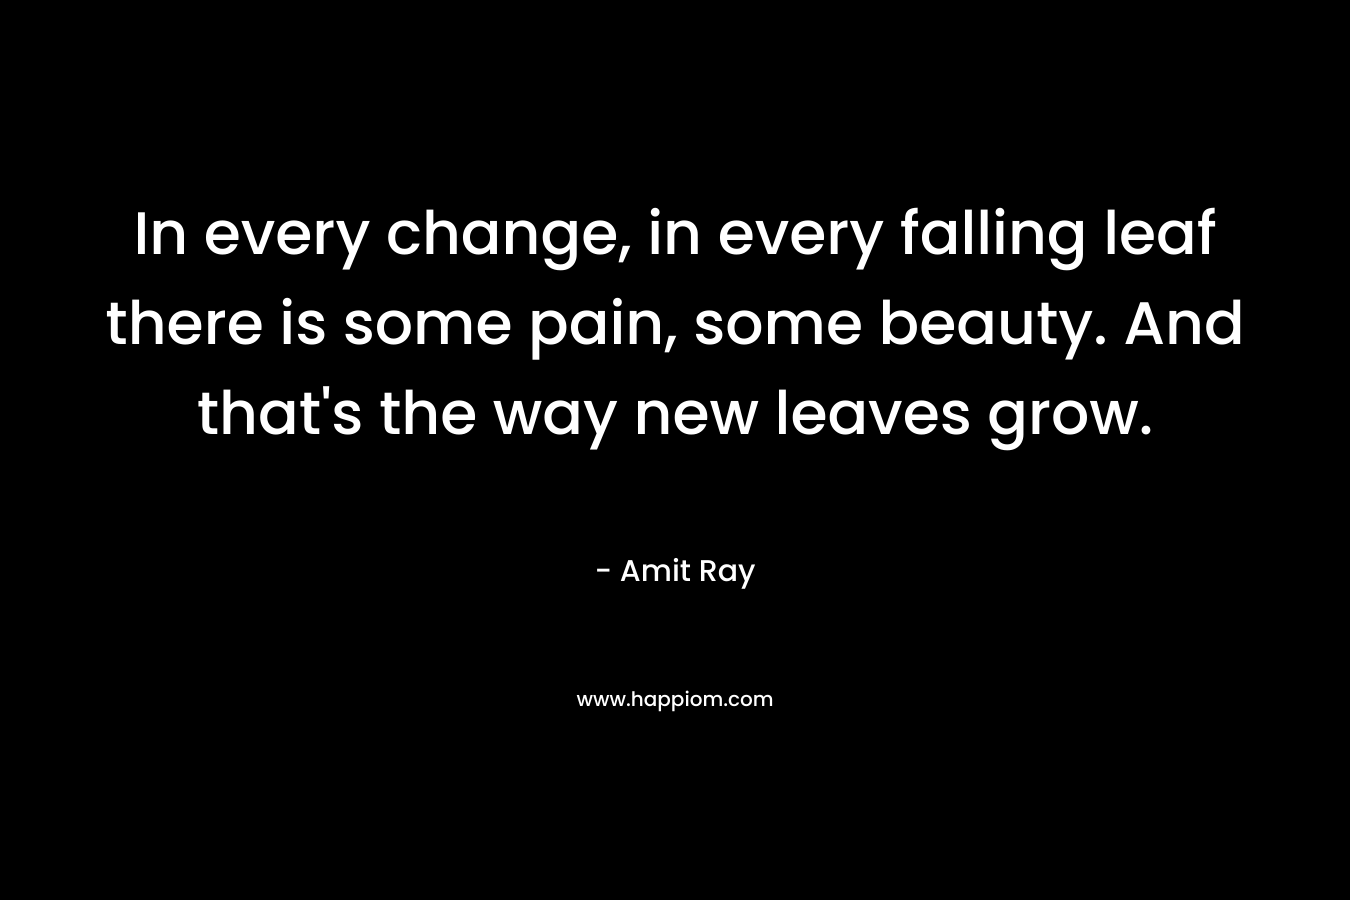 In every change, in every falling leaf there is some pain, some beauty. And that's the way new leaves grow.